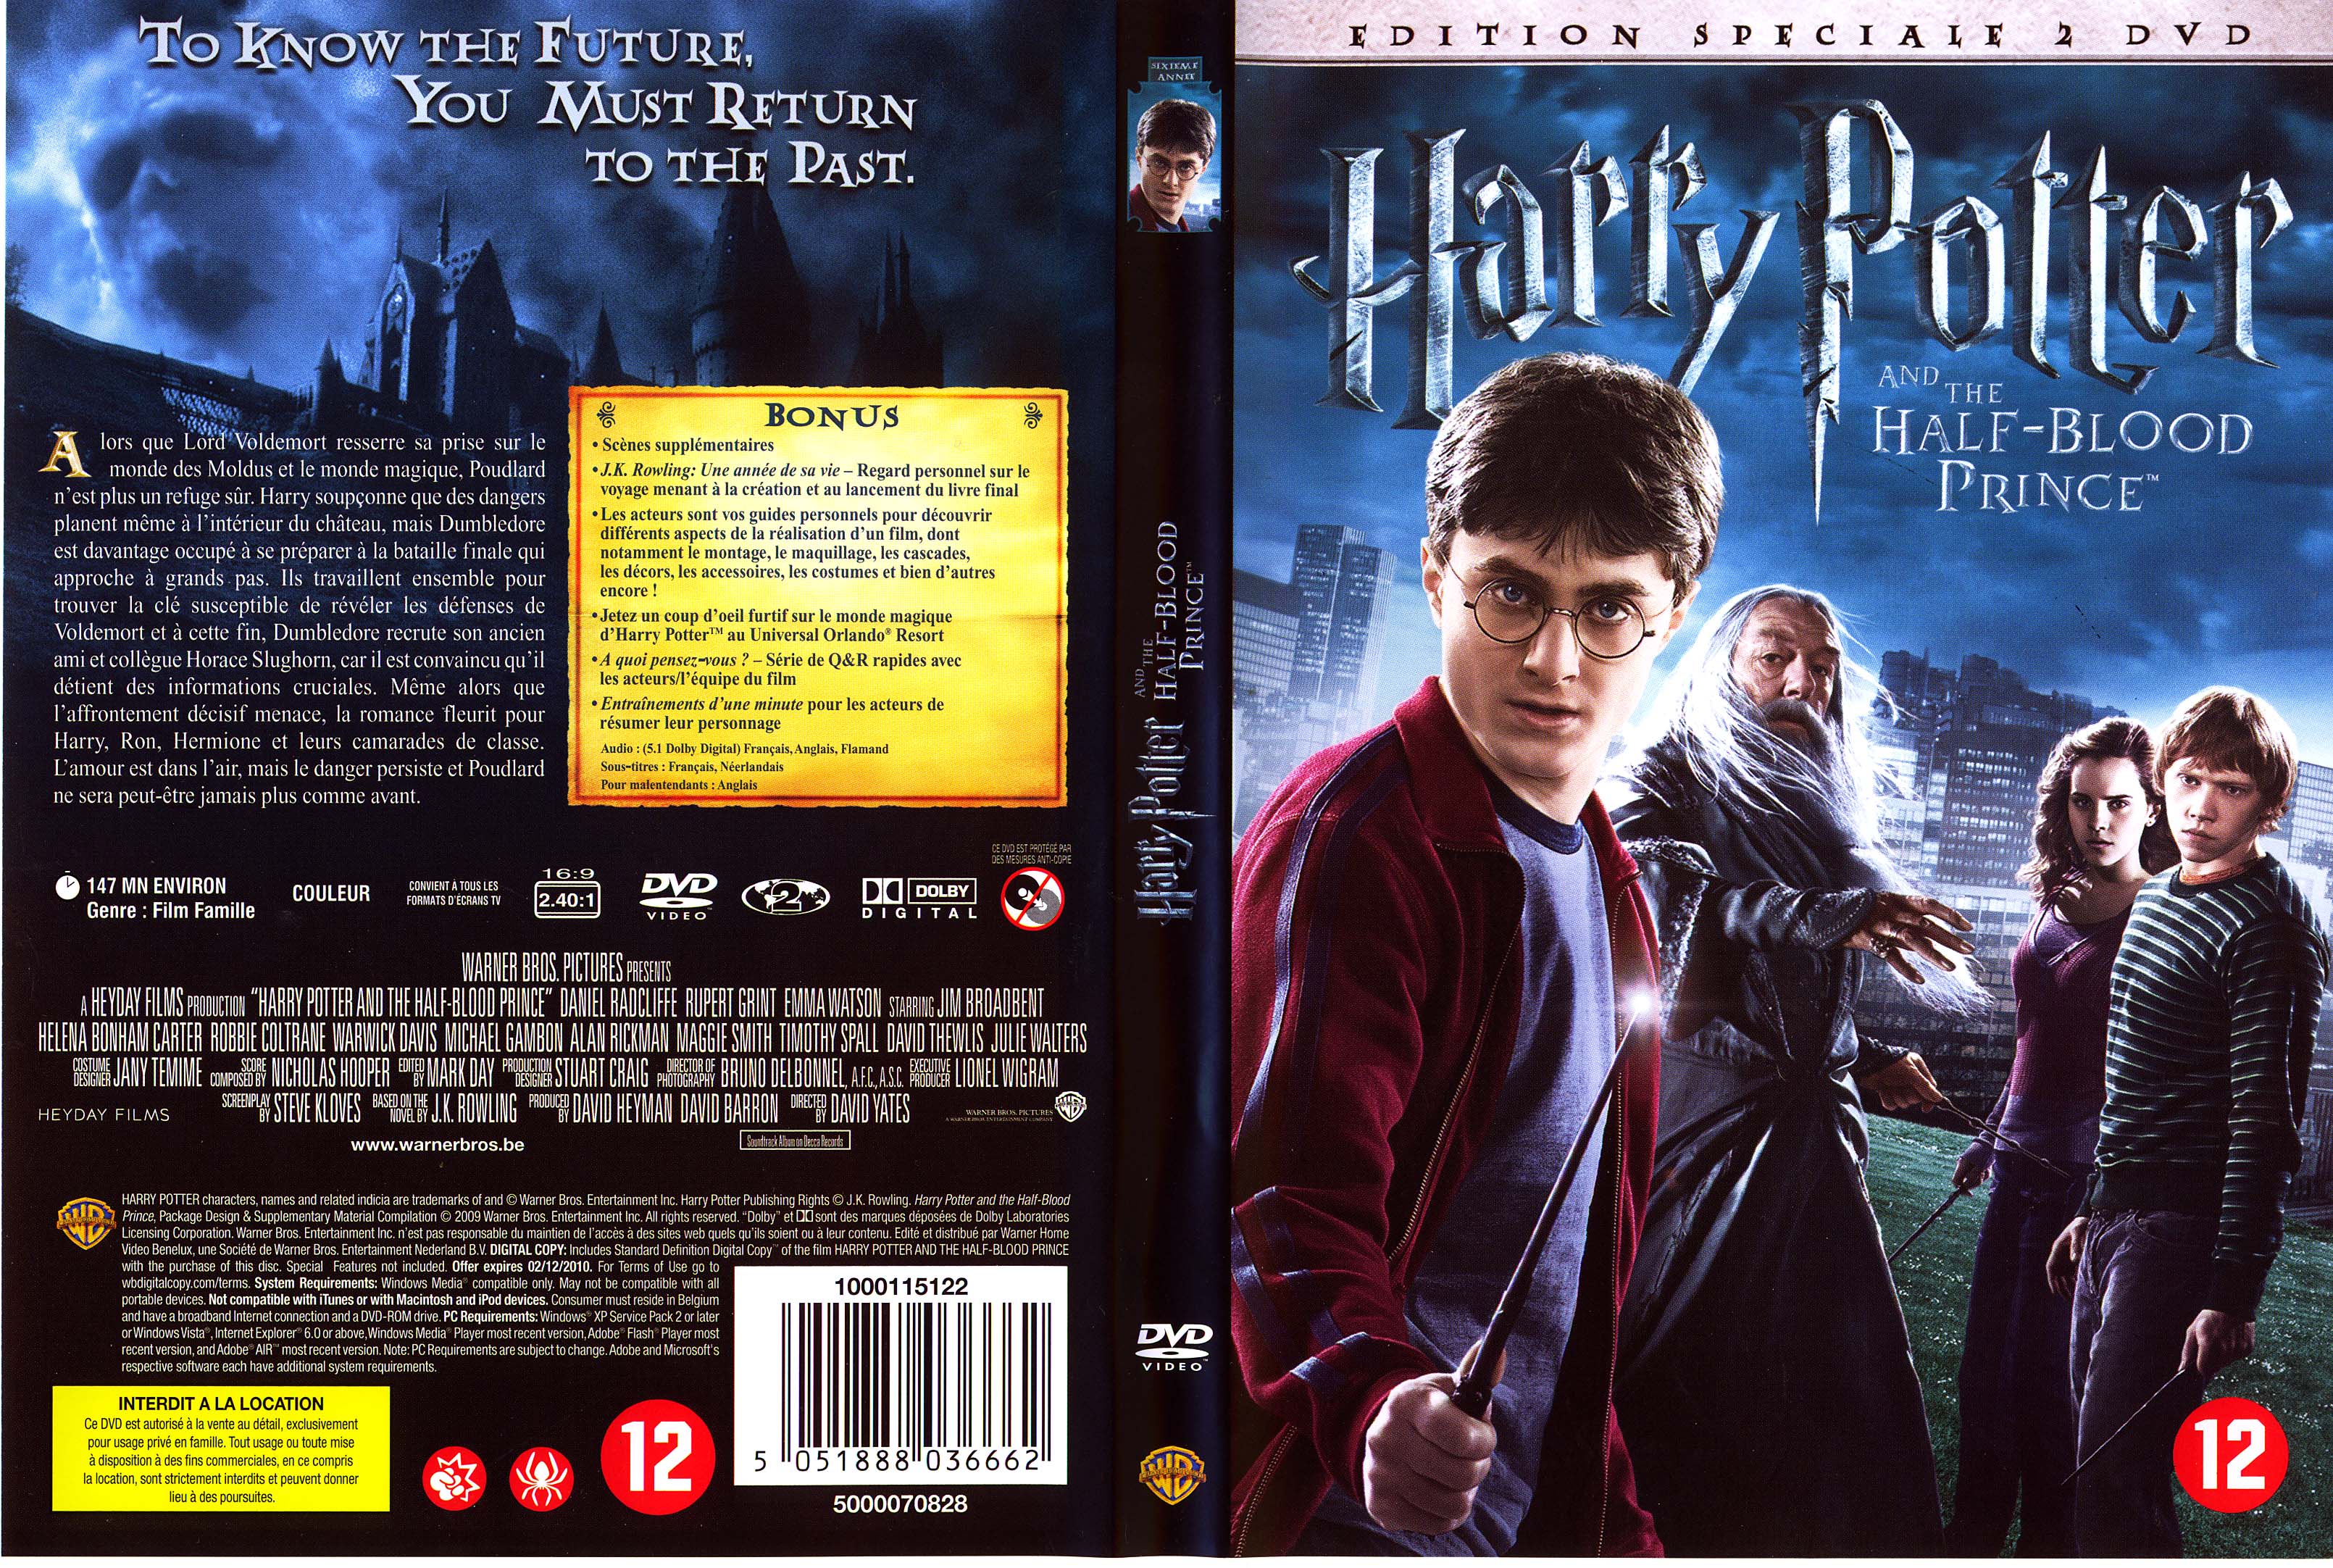 Jaquette DVD Harry Potter and the Half-Blood Prince